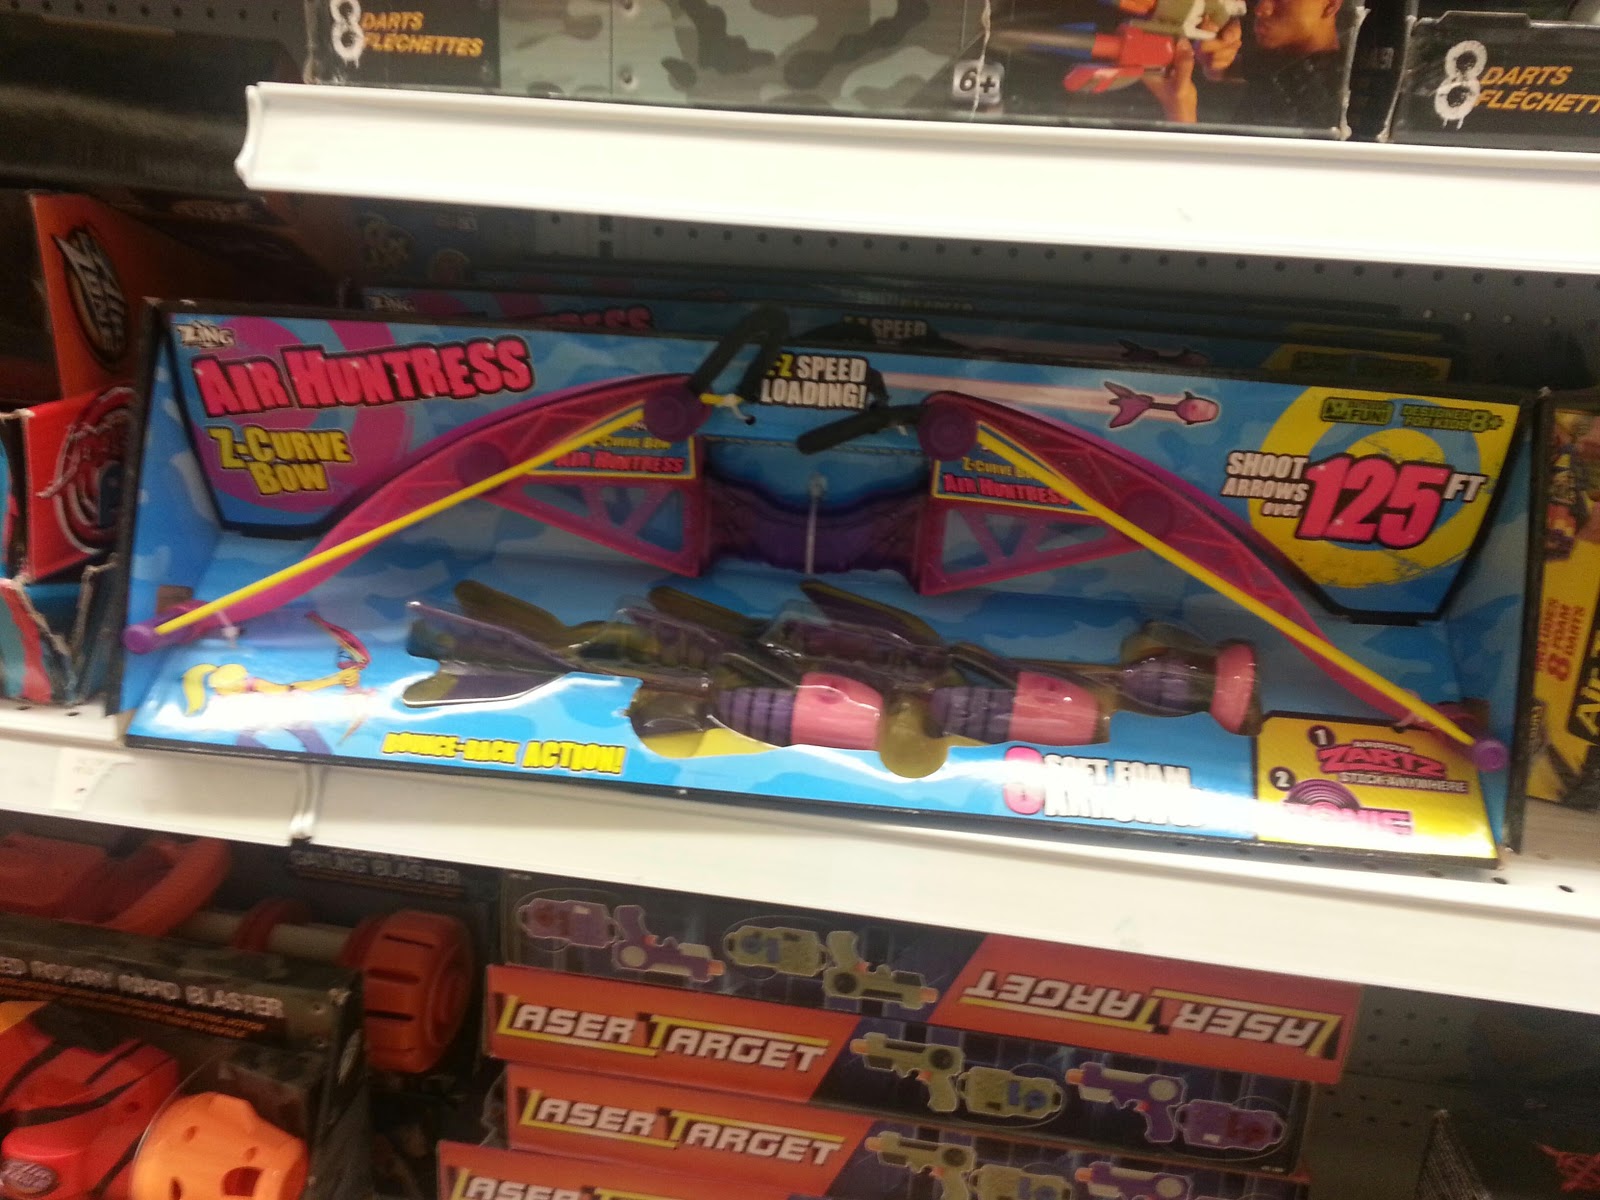 Toys R Us visit: some new blasters? – Foam From Above